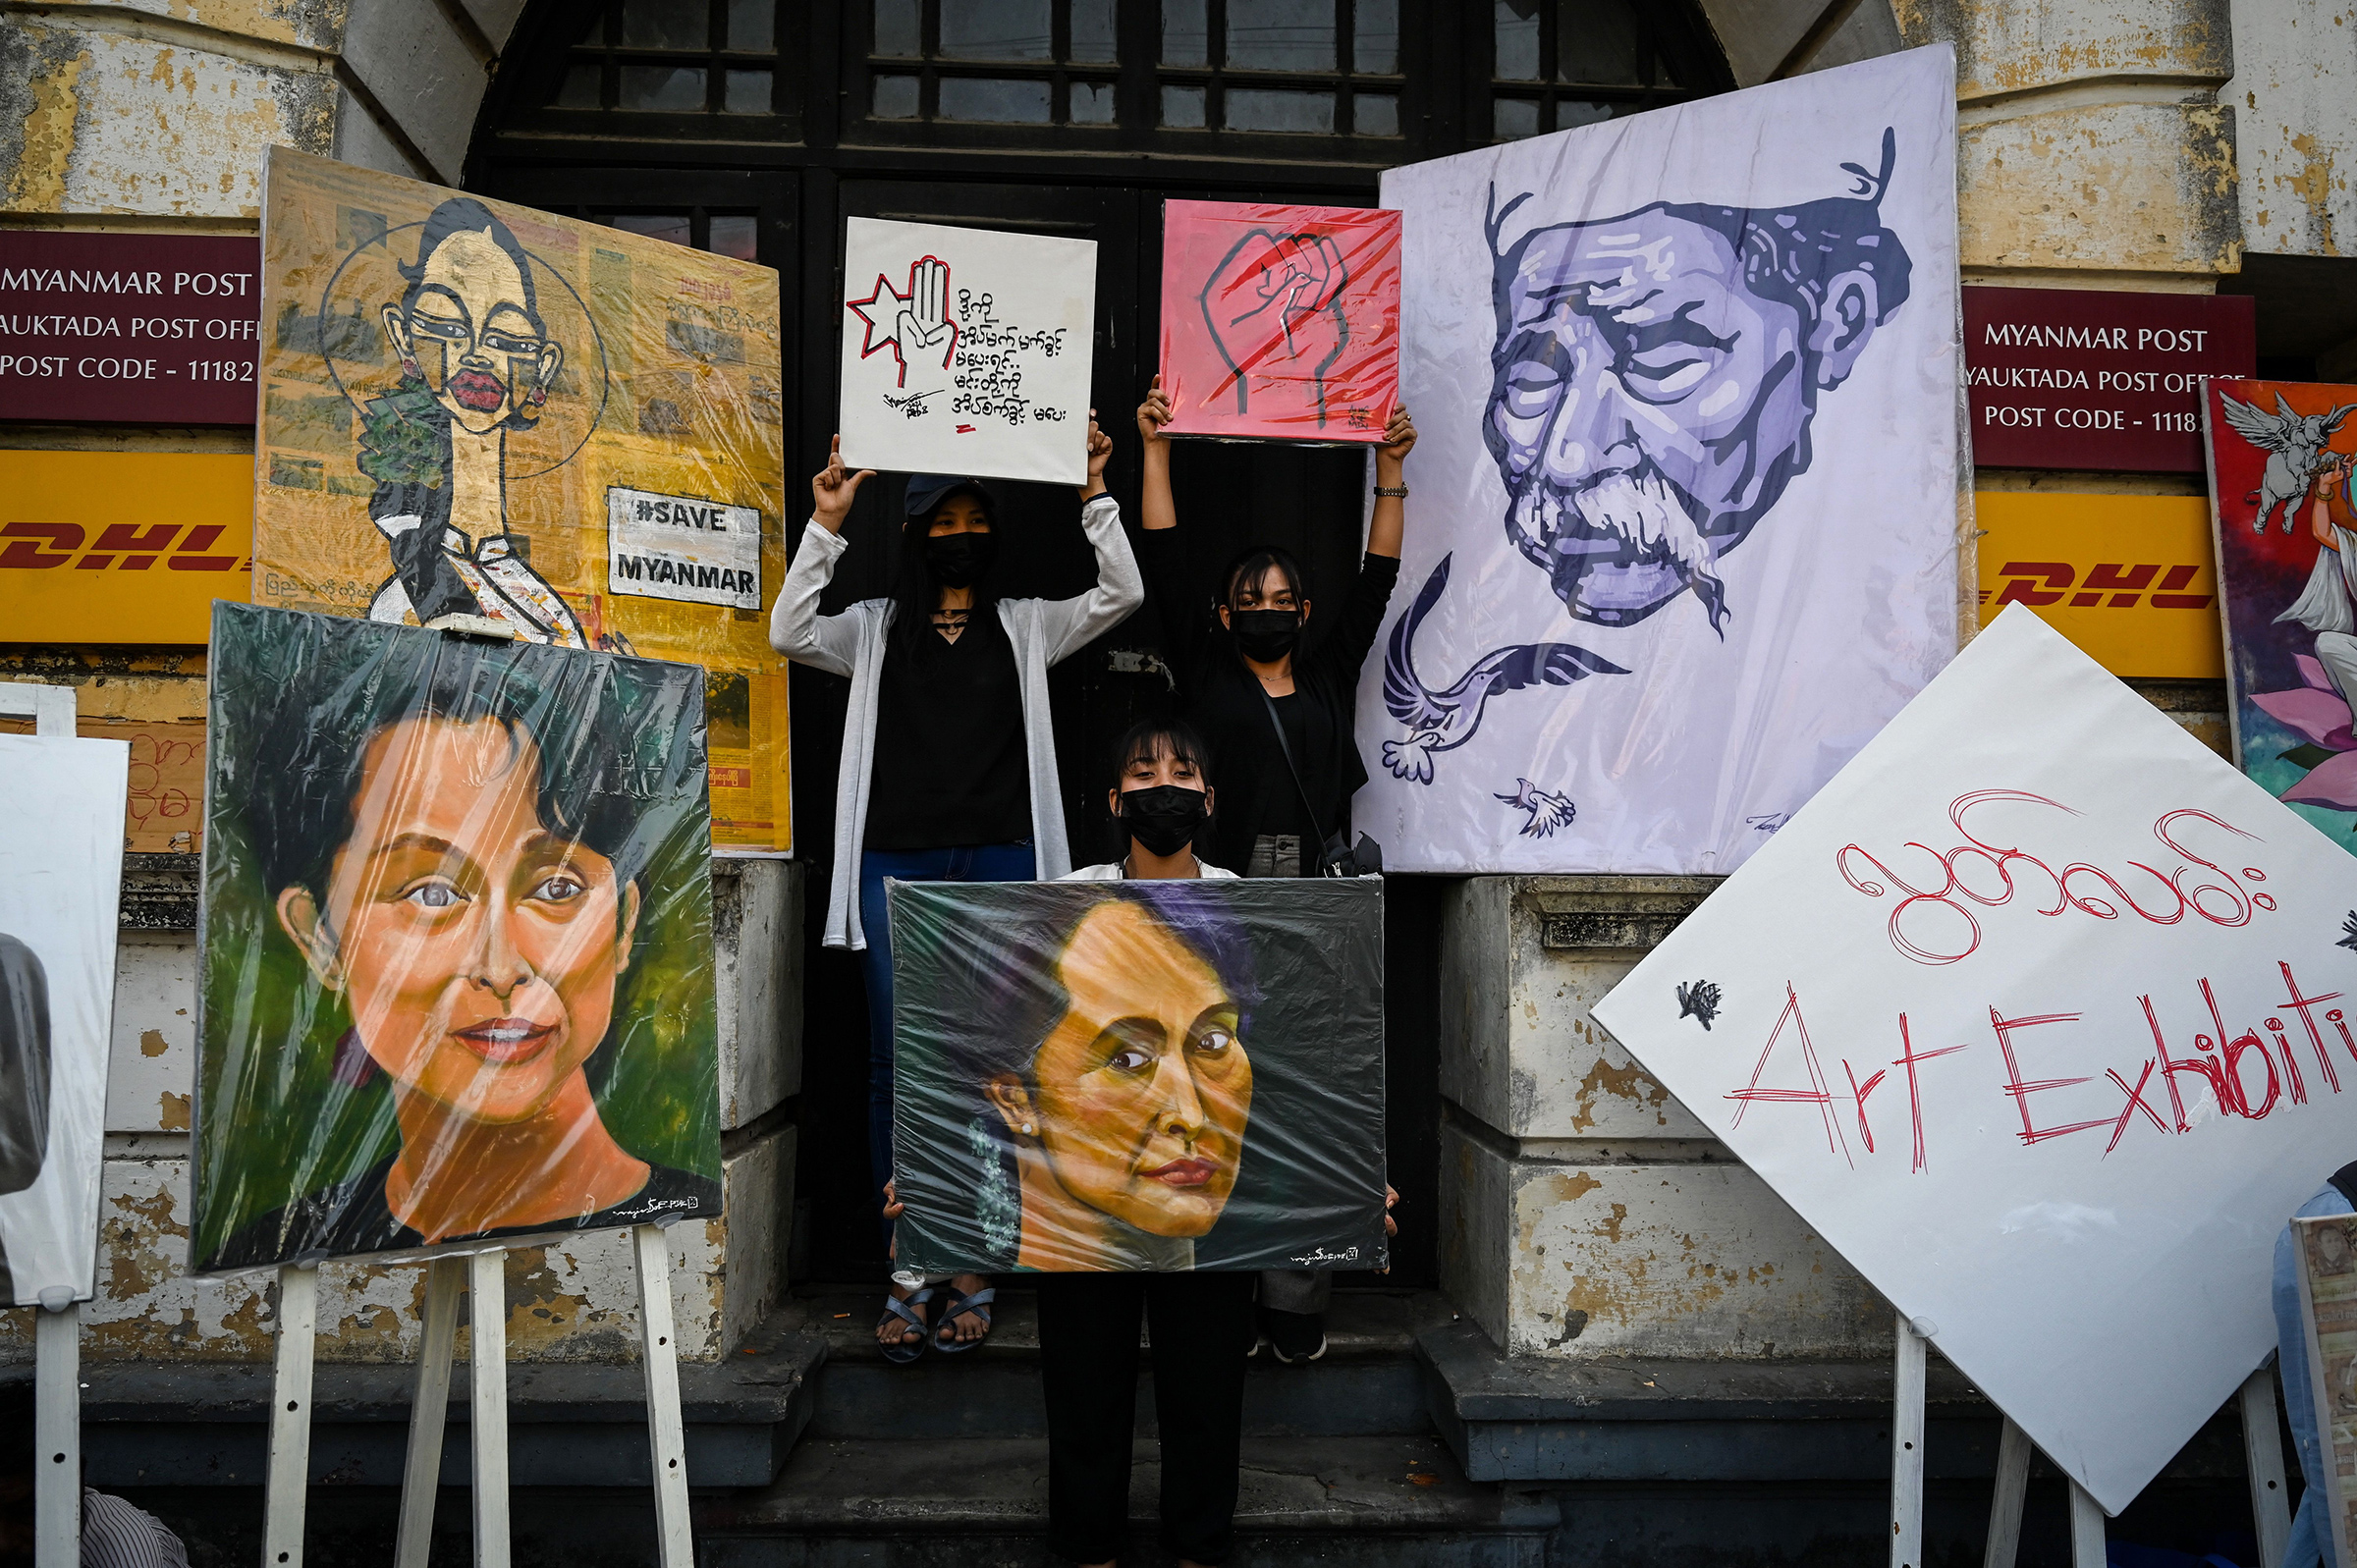 Protesters stand next to portraits of Aung San Suu Kyi and other artwork during a demonstration against the military coup in Yangon on Feb. 9